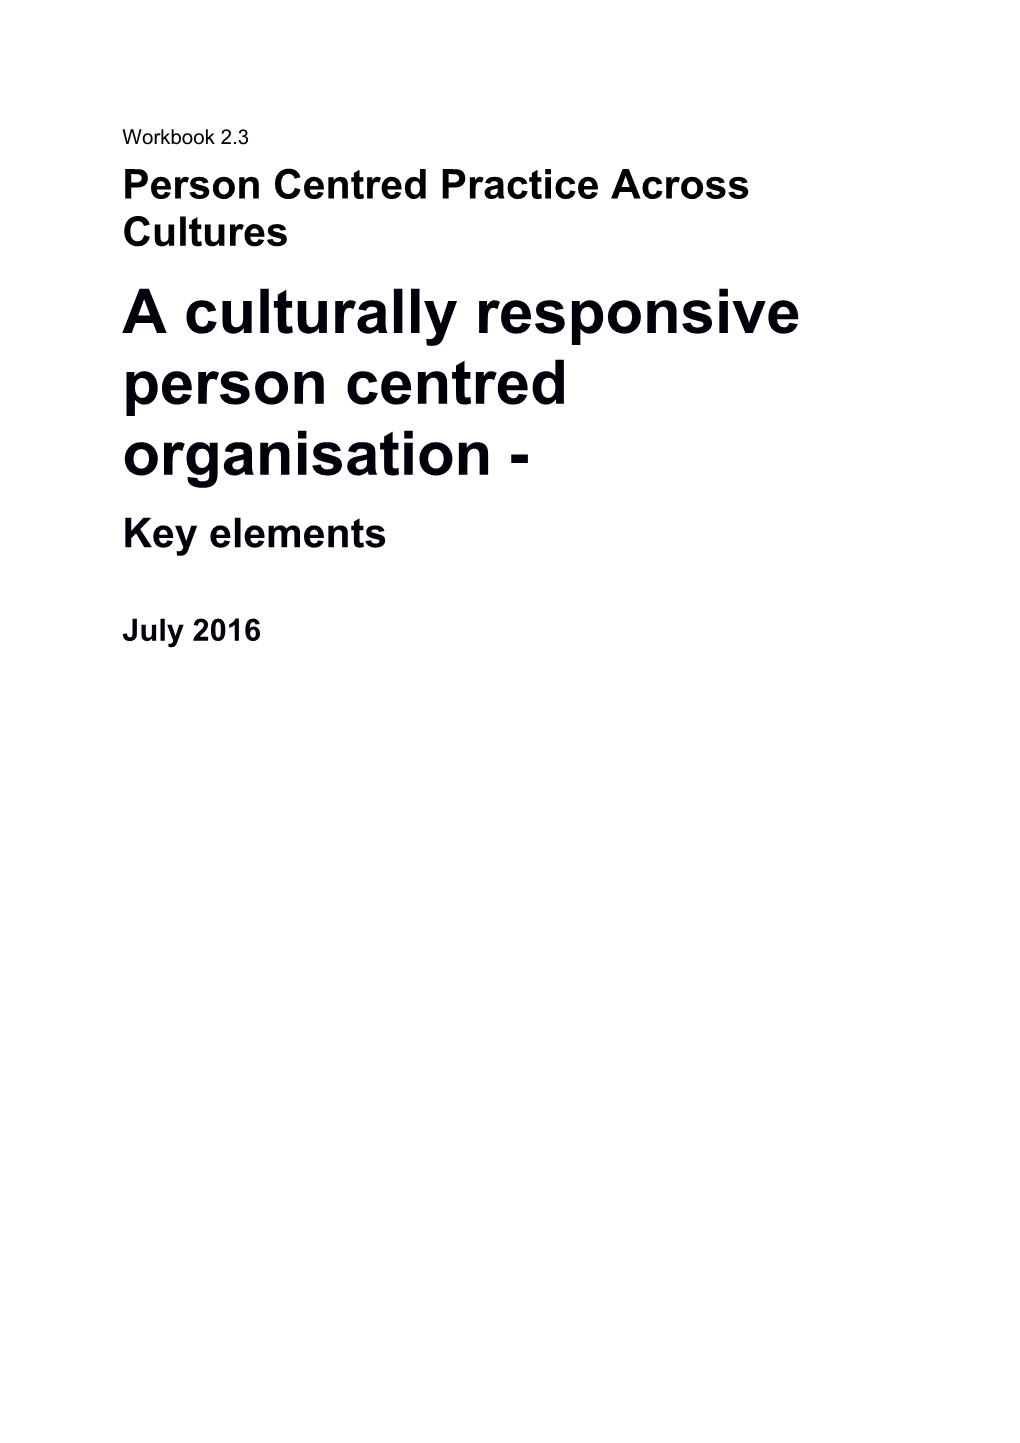 Person Centred Practice Across Cultures